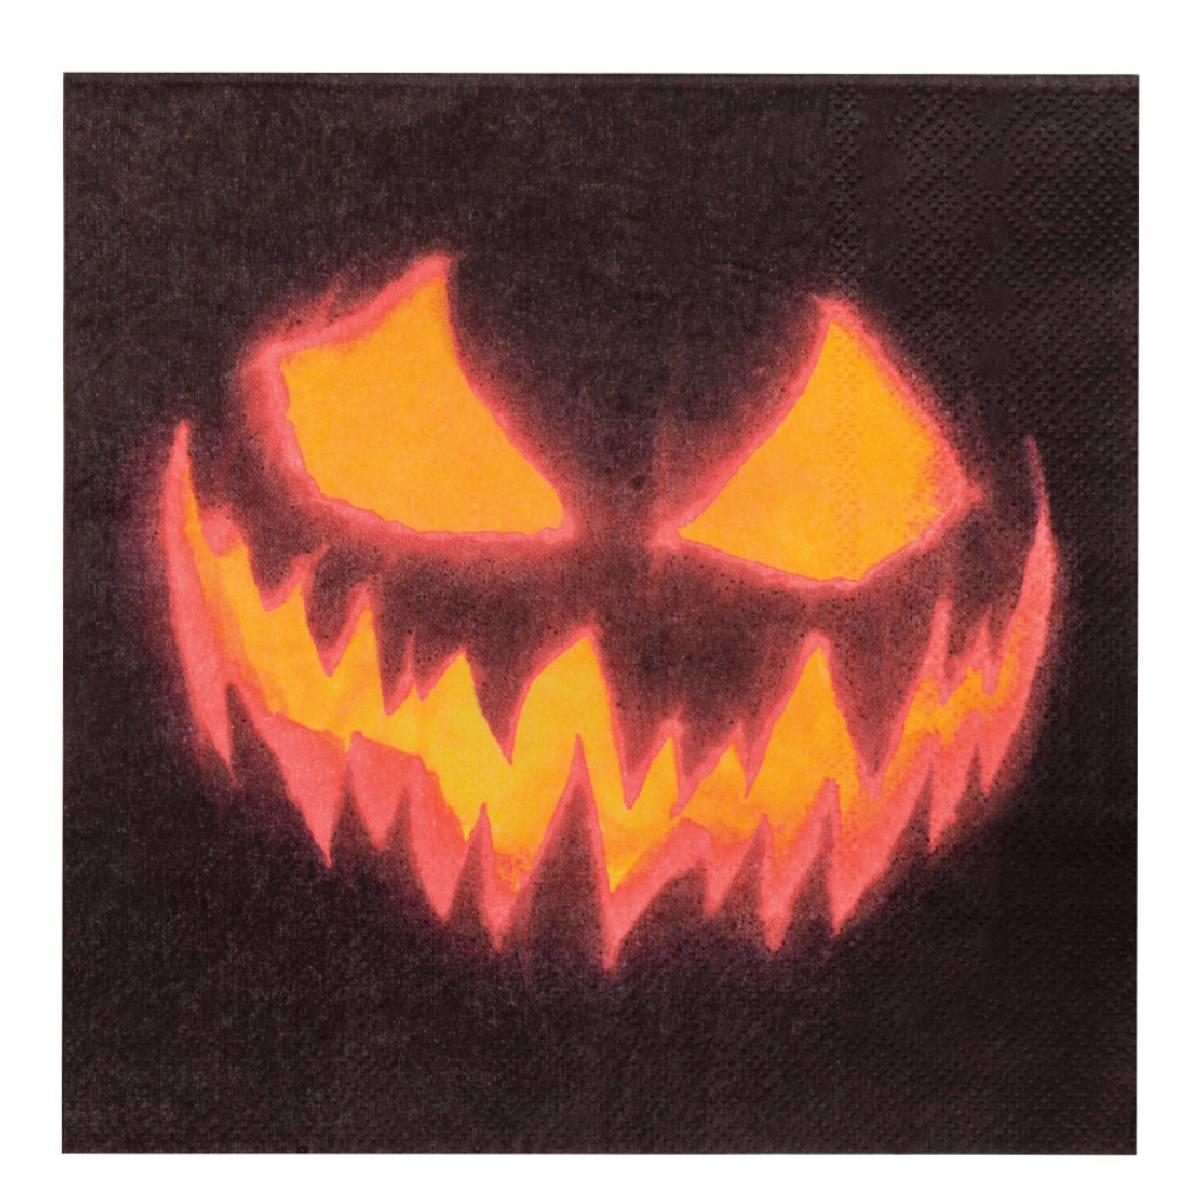 Creepy Pumpkin Halloween party paper napkins pk20 by Palmers 5855n available here at Karnival Costumes online Halloween party shop